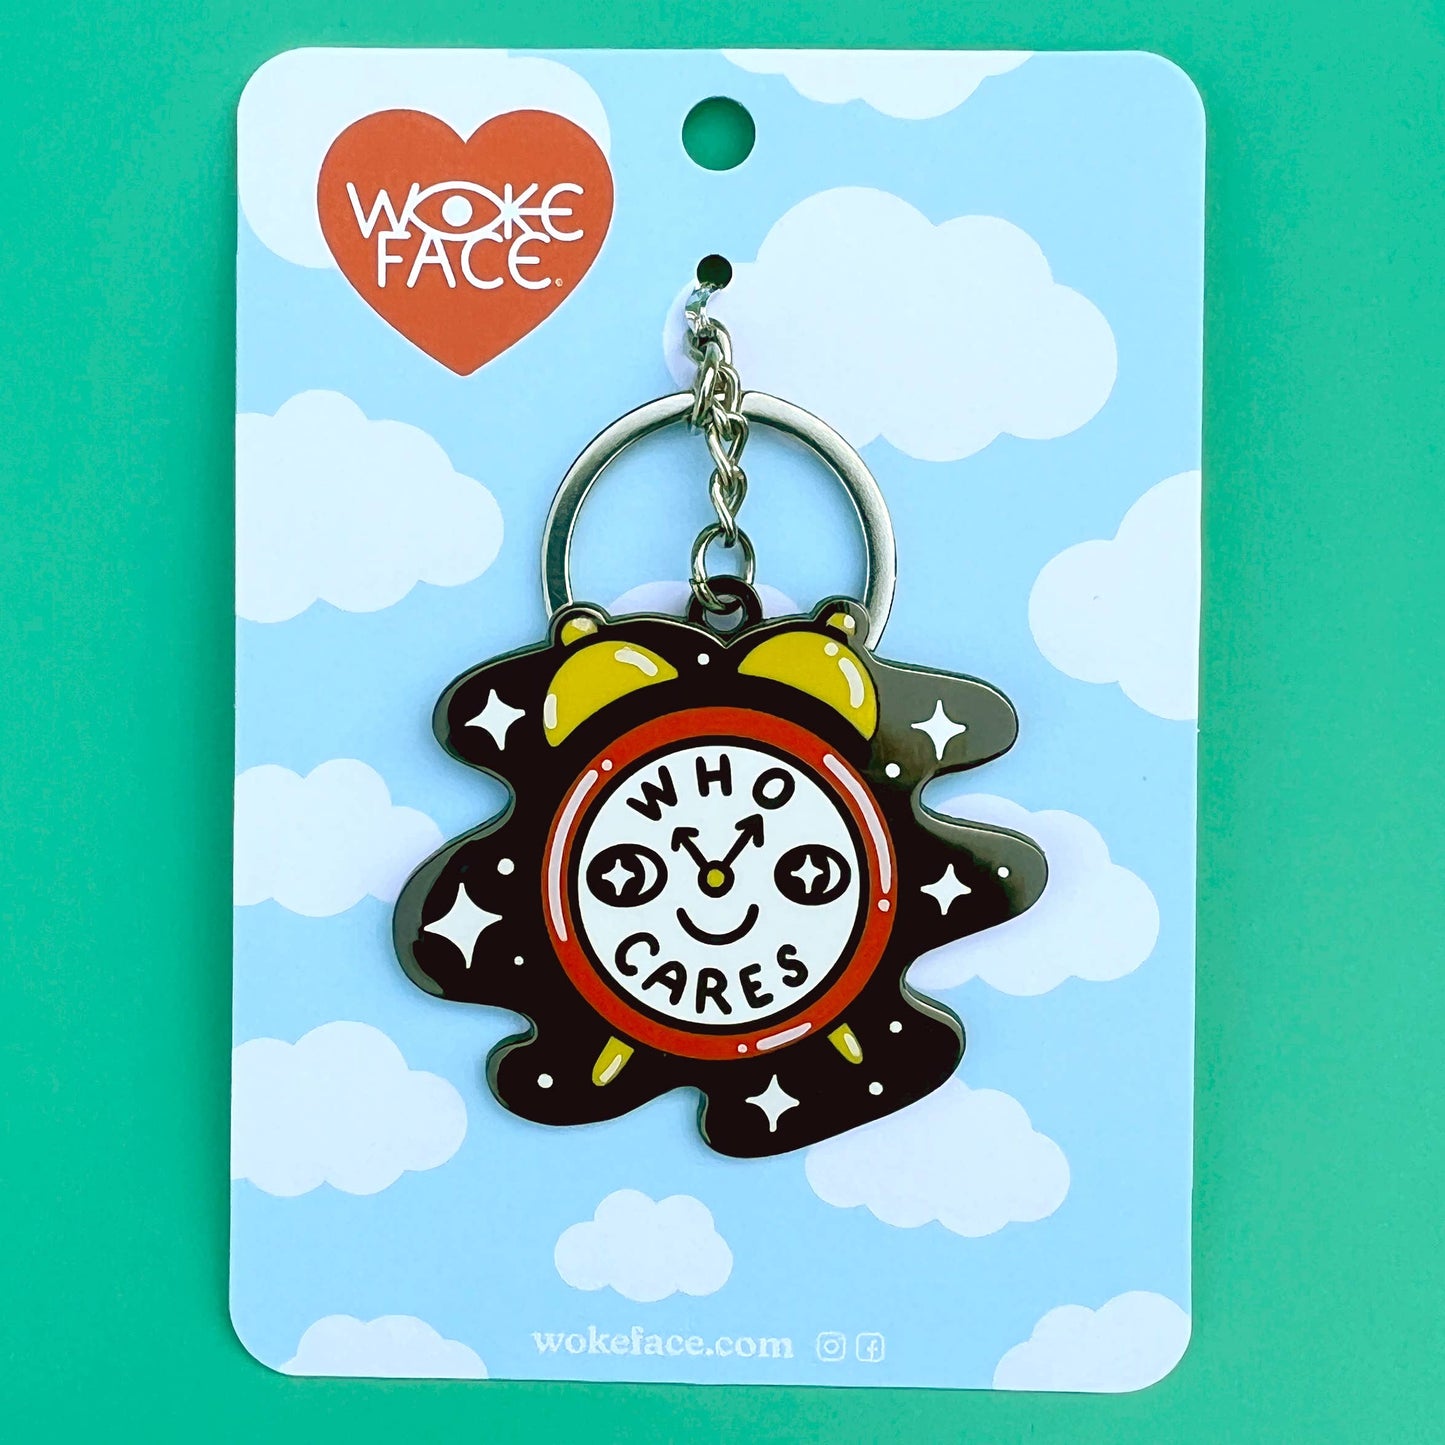 Who Cares Clock Keychain